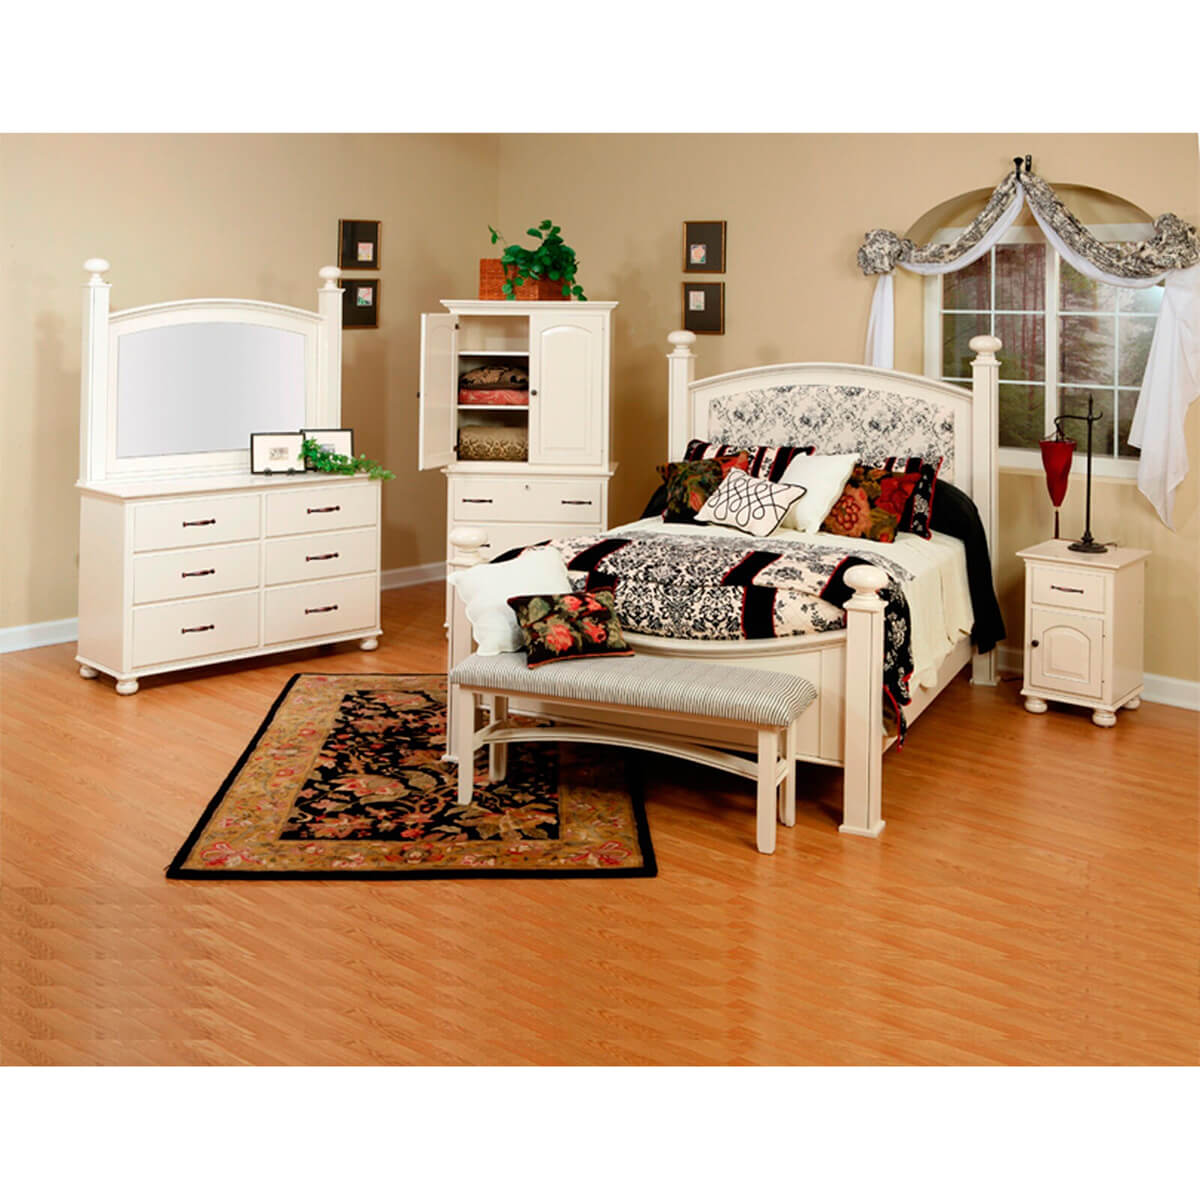 LuellenBedroomCollection98612